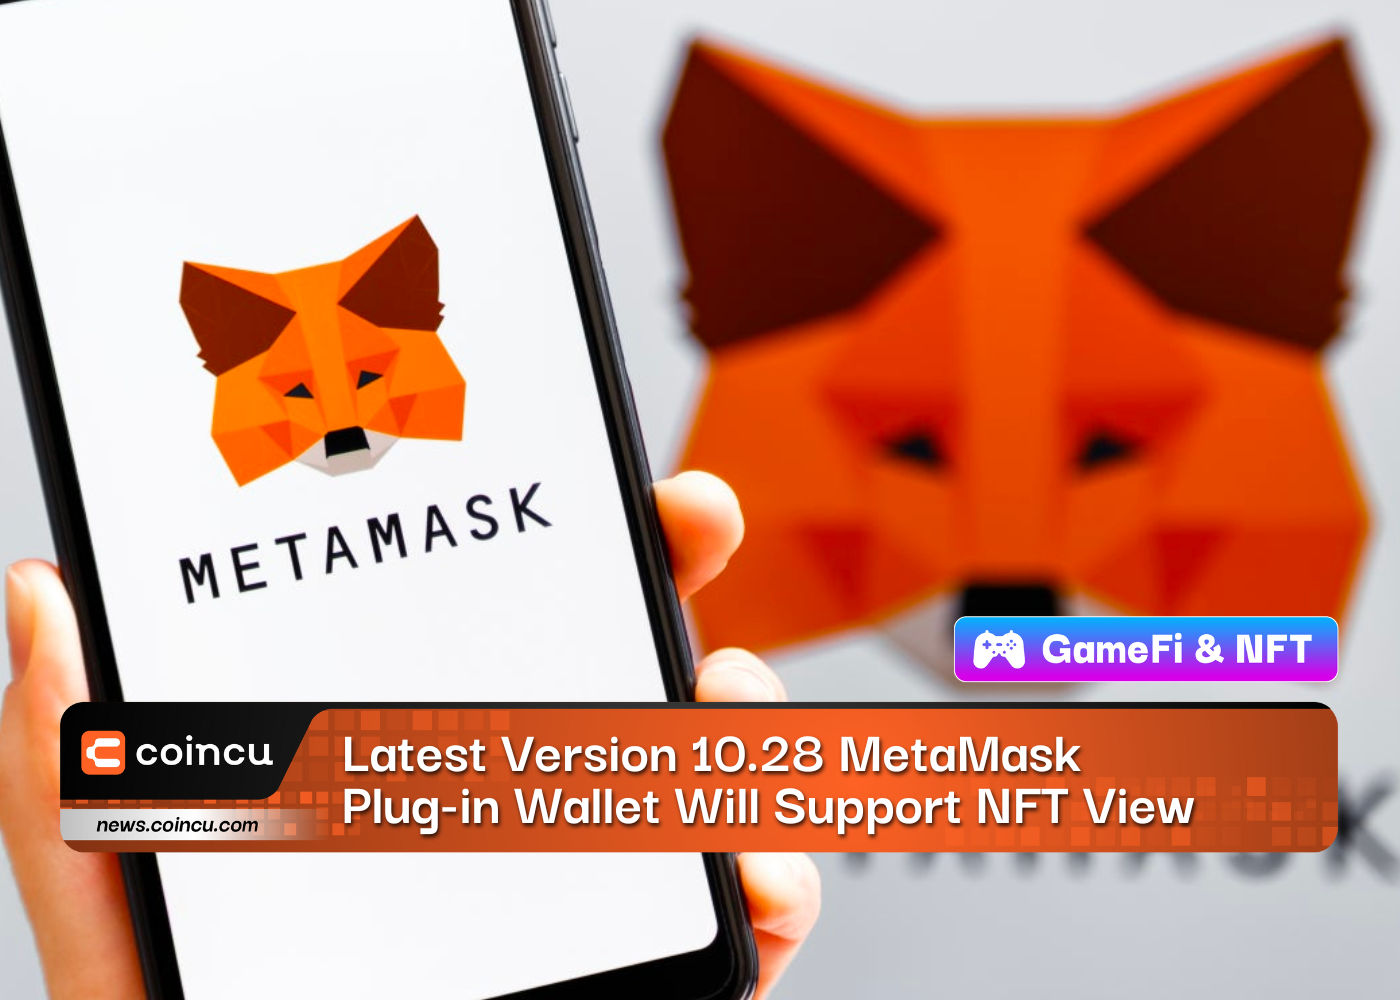 Latest Version 10.28 MetaMask Plug-in Wallet Will Support NFT View